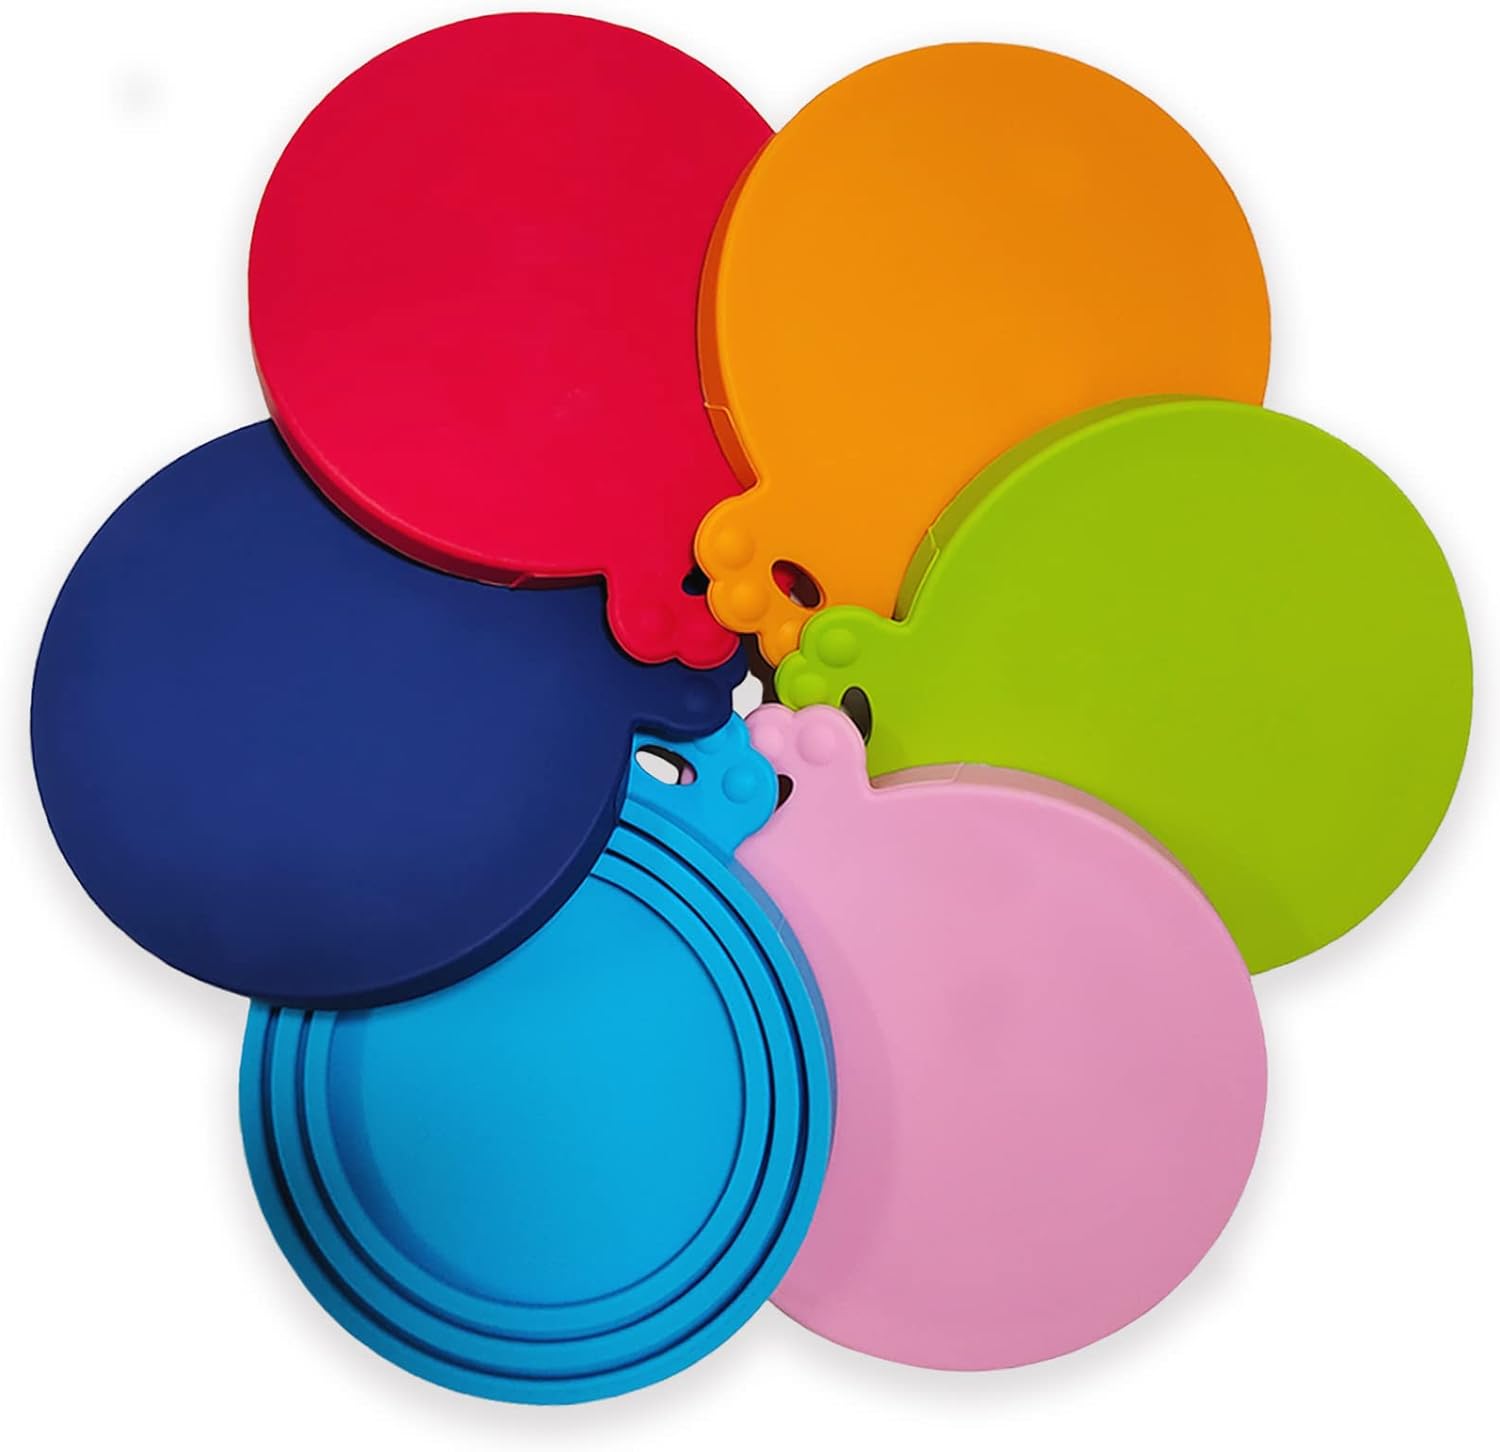 RARISSIME 6 Pack Can Lids Cover for Pet Food,Dog Cat Can Covers Lid Fit All Standard Size,BPA Free and Dishwasher Safe Silicone Can Cap Tops for Pet Food Storage (multicolor)